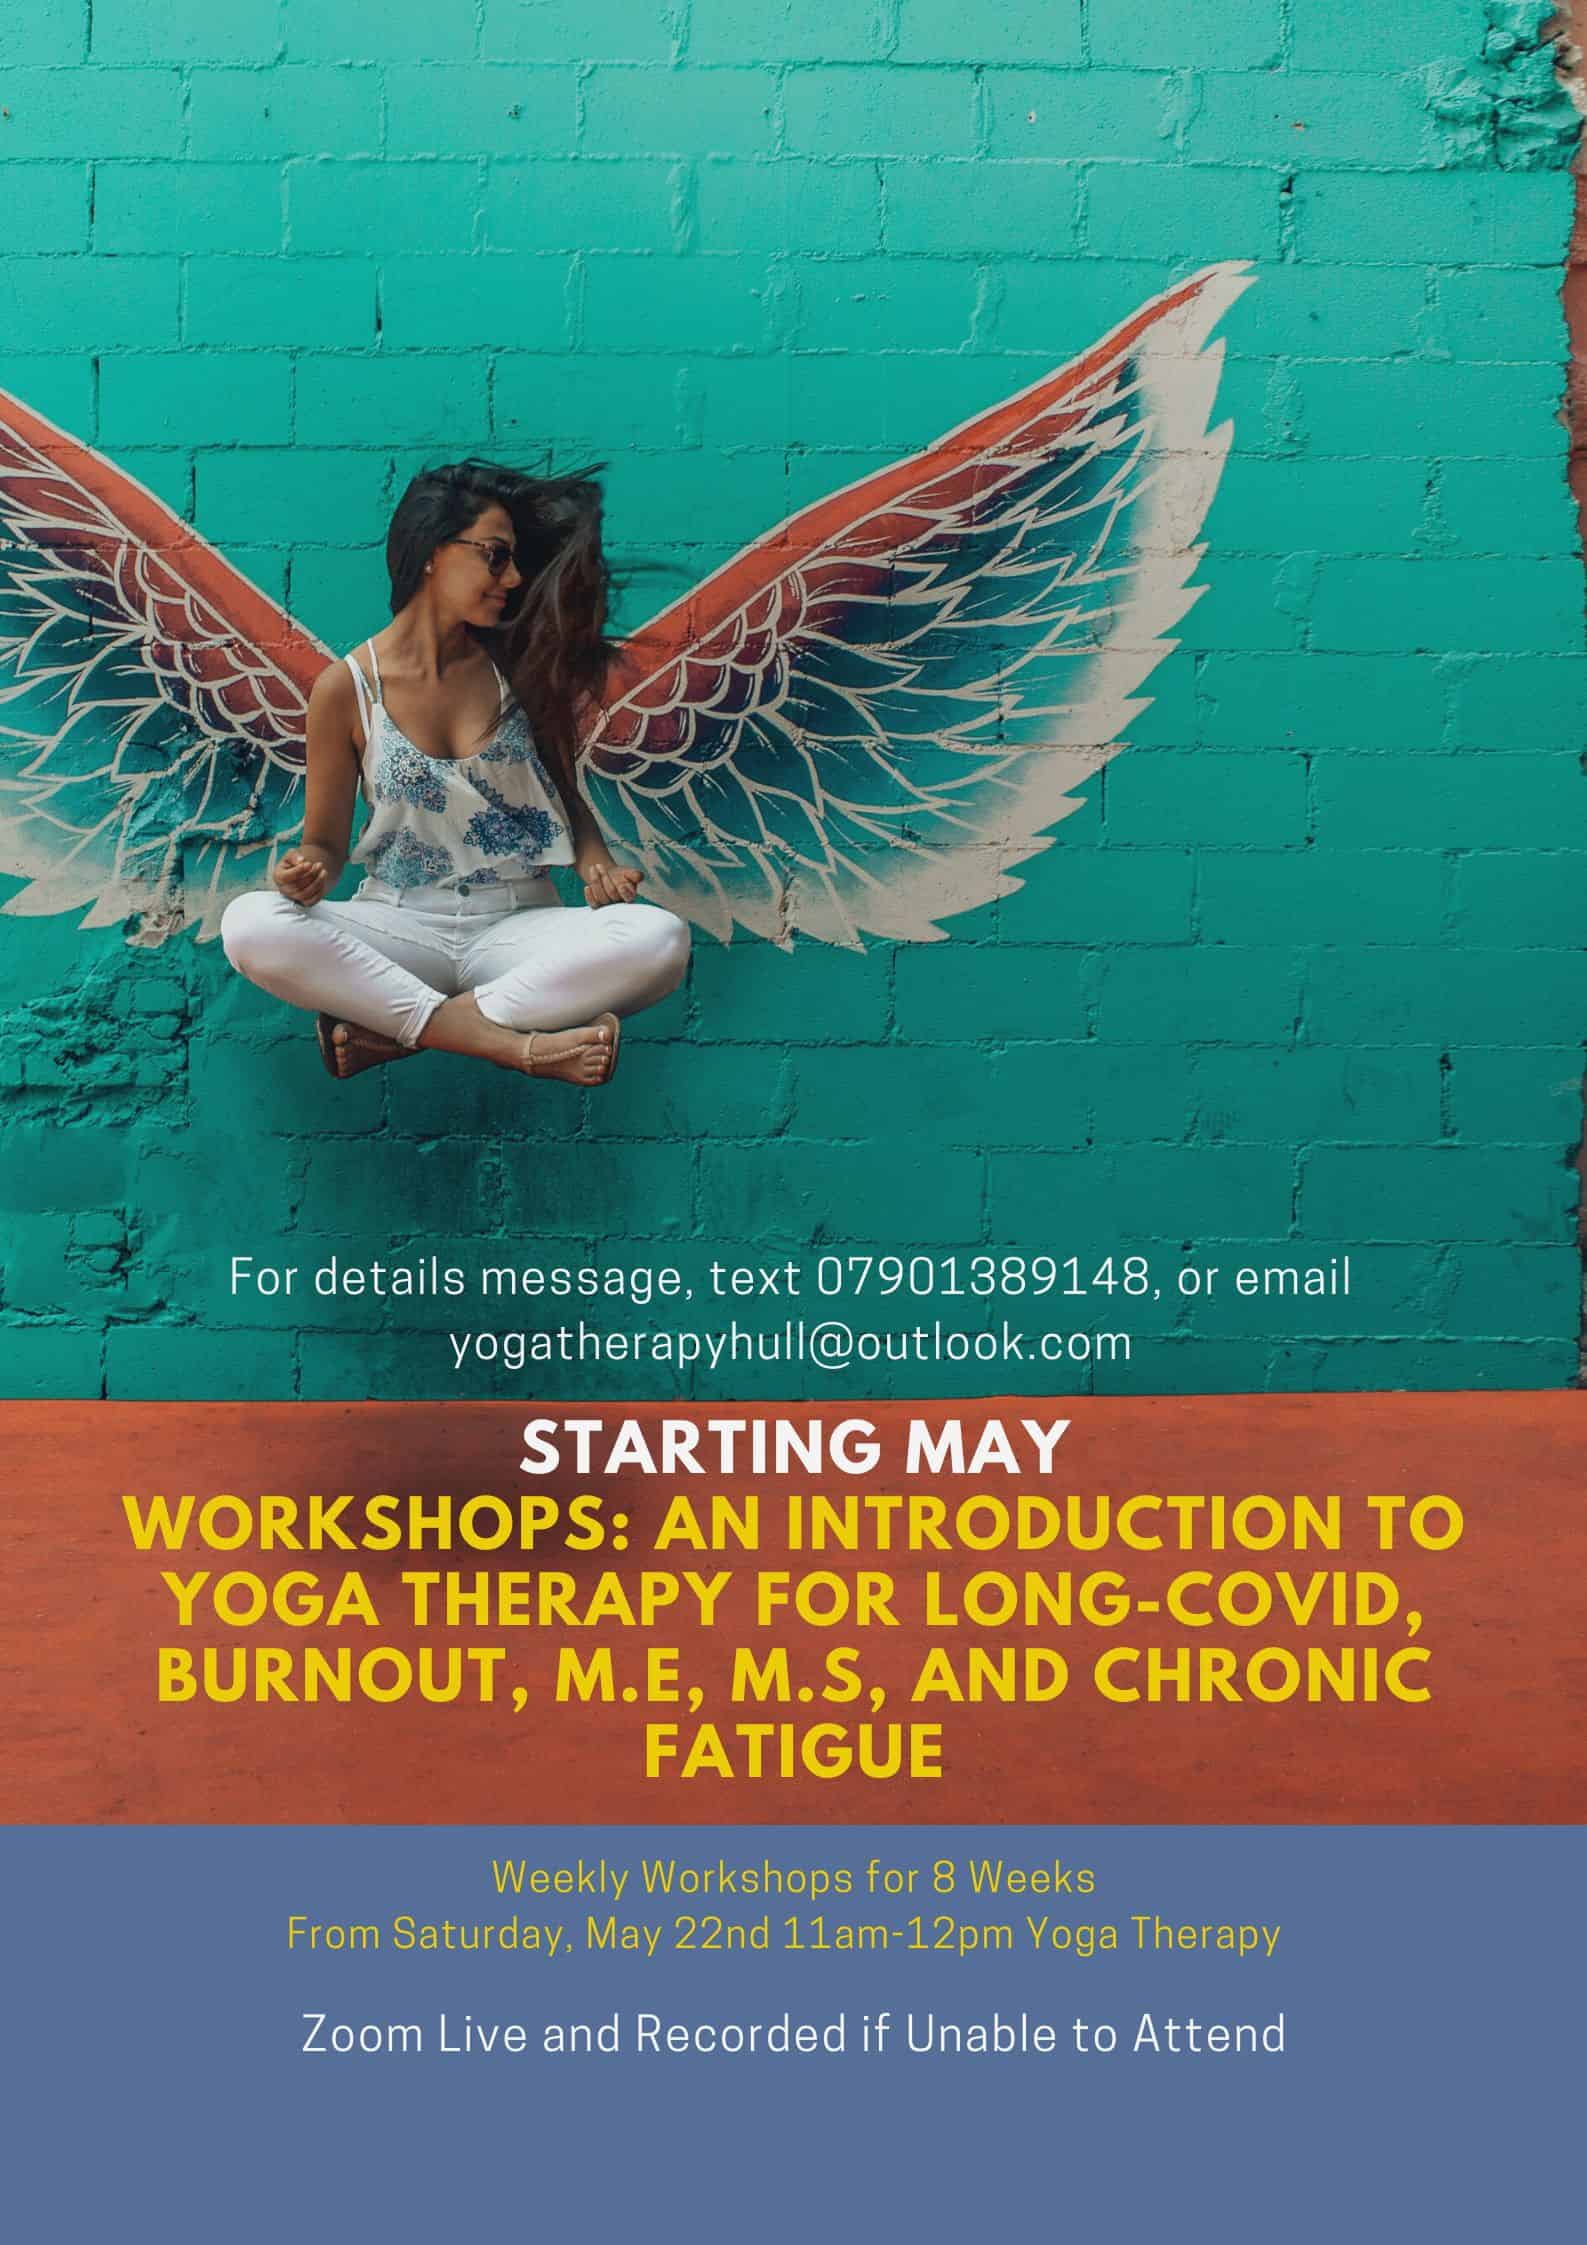 Workshop: An Introduction to Yoga Therapy for Long-Covid, Burnout, M.E., M.S., and Chronic Fatigue